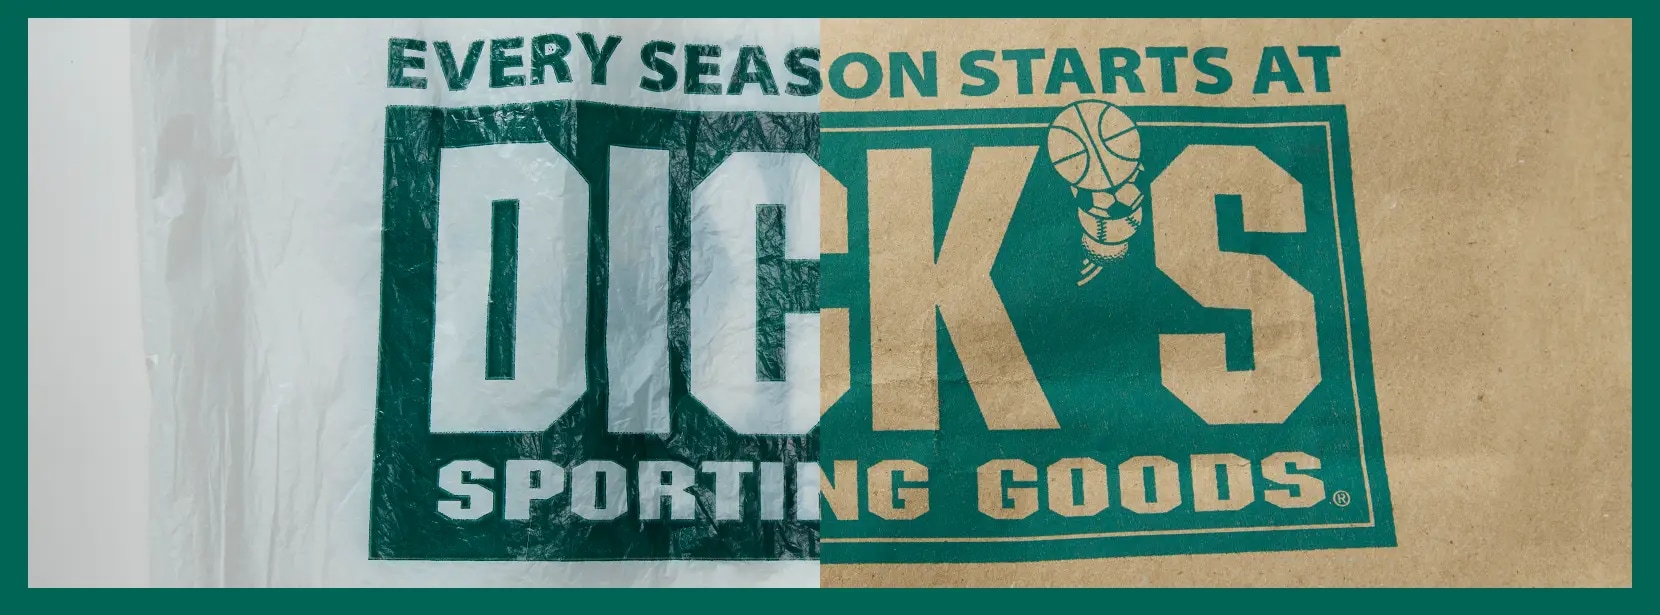 Dick's Sporting Goods Targets $2 Billion in Private Label Sales, Launching  DSG Brand - Licensing International